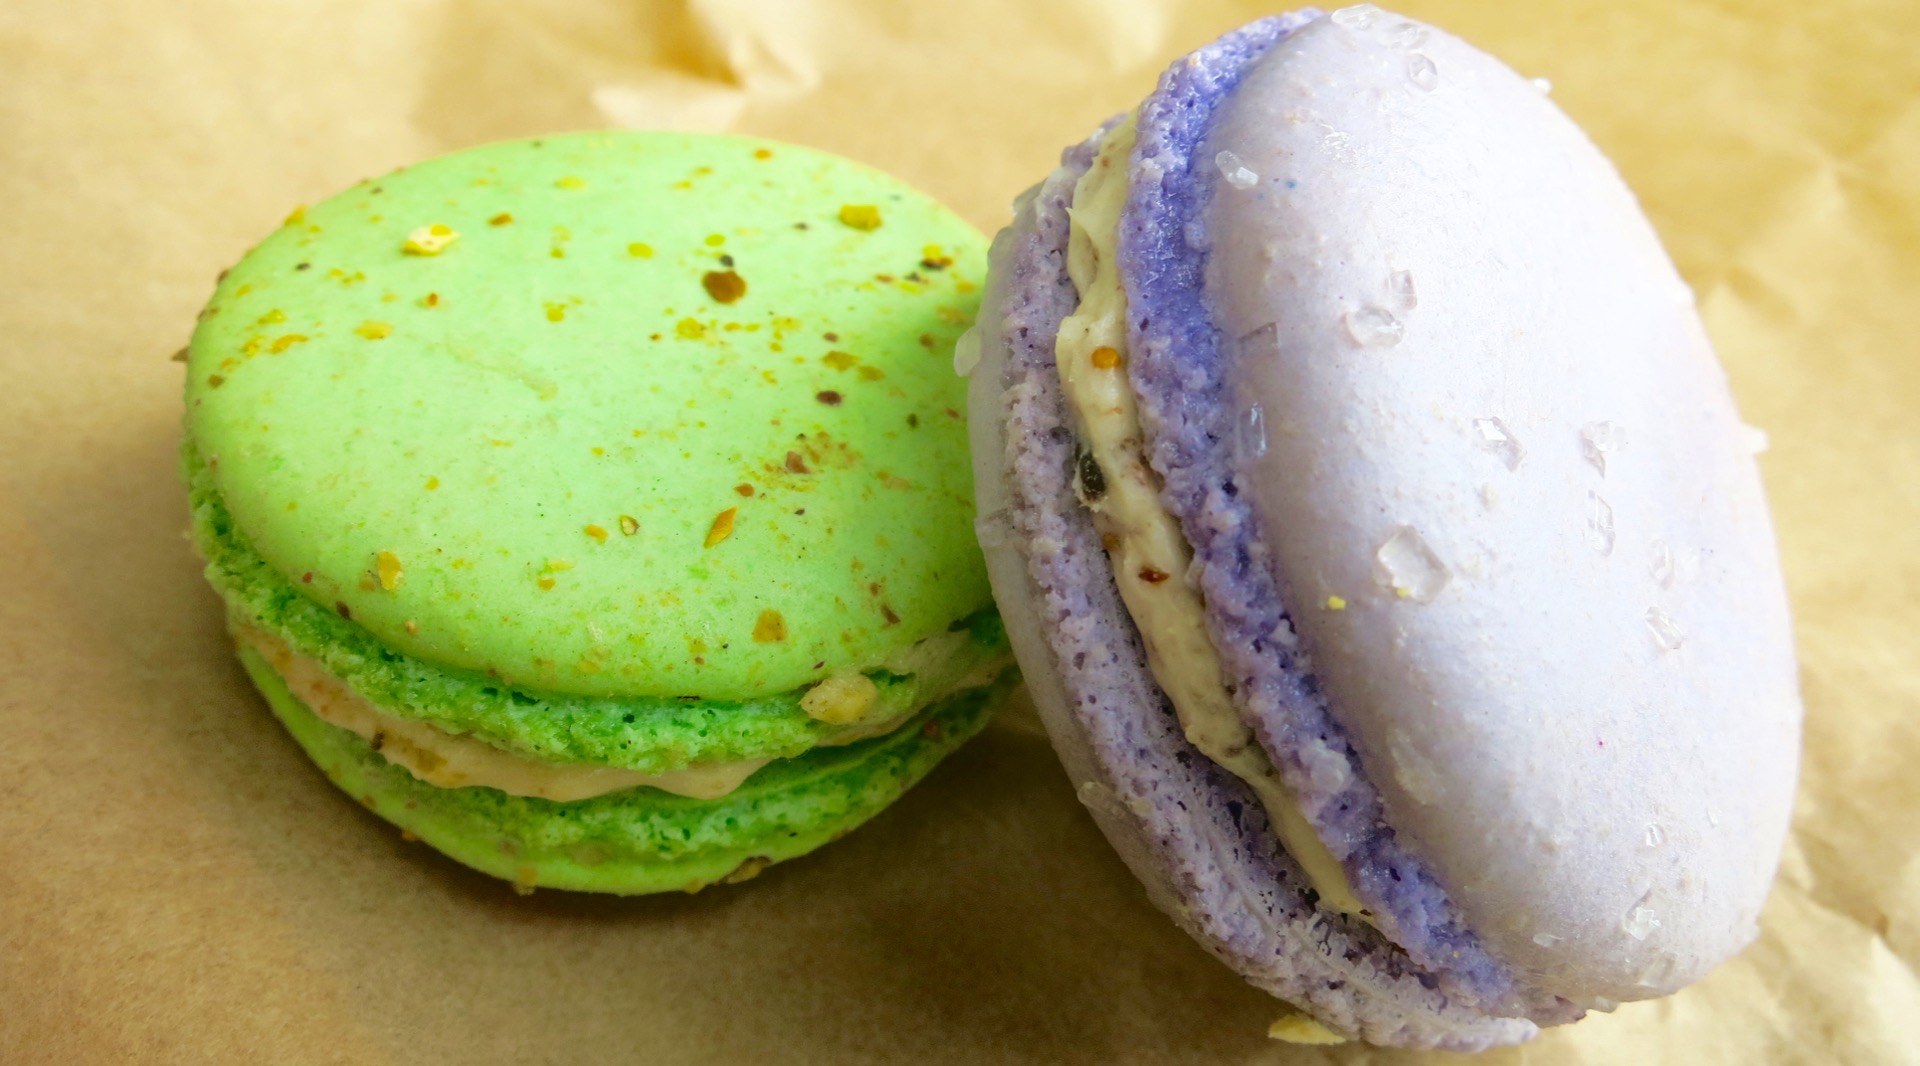 Pistachio and honey lavendar macarons from Feel Good Bakery in Alameda